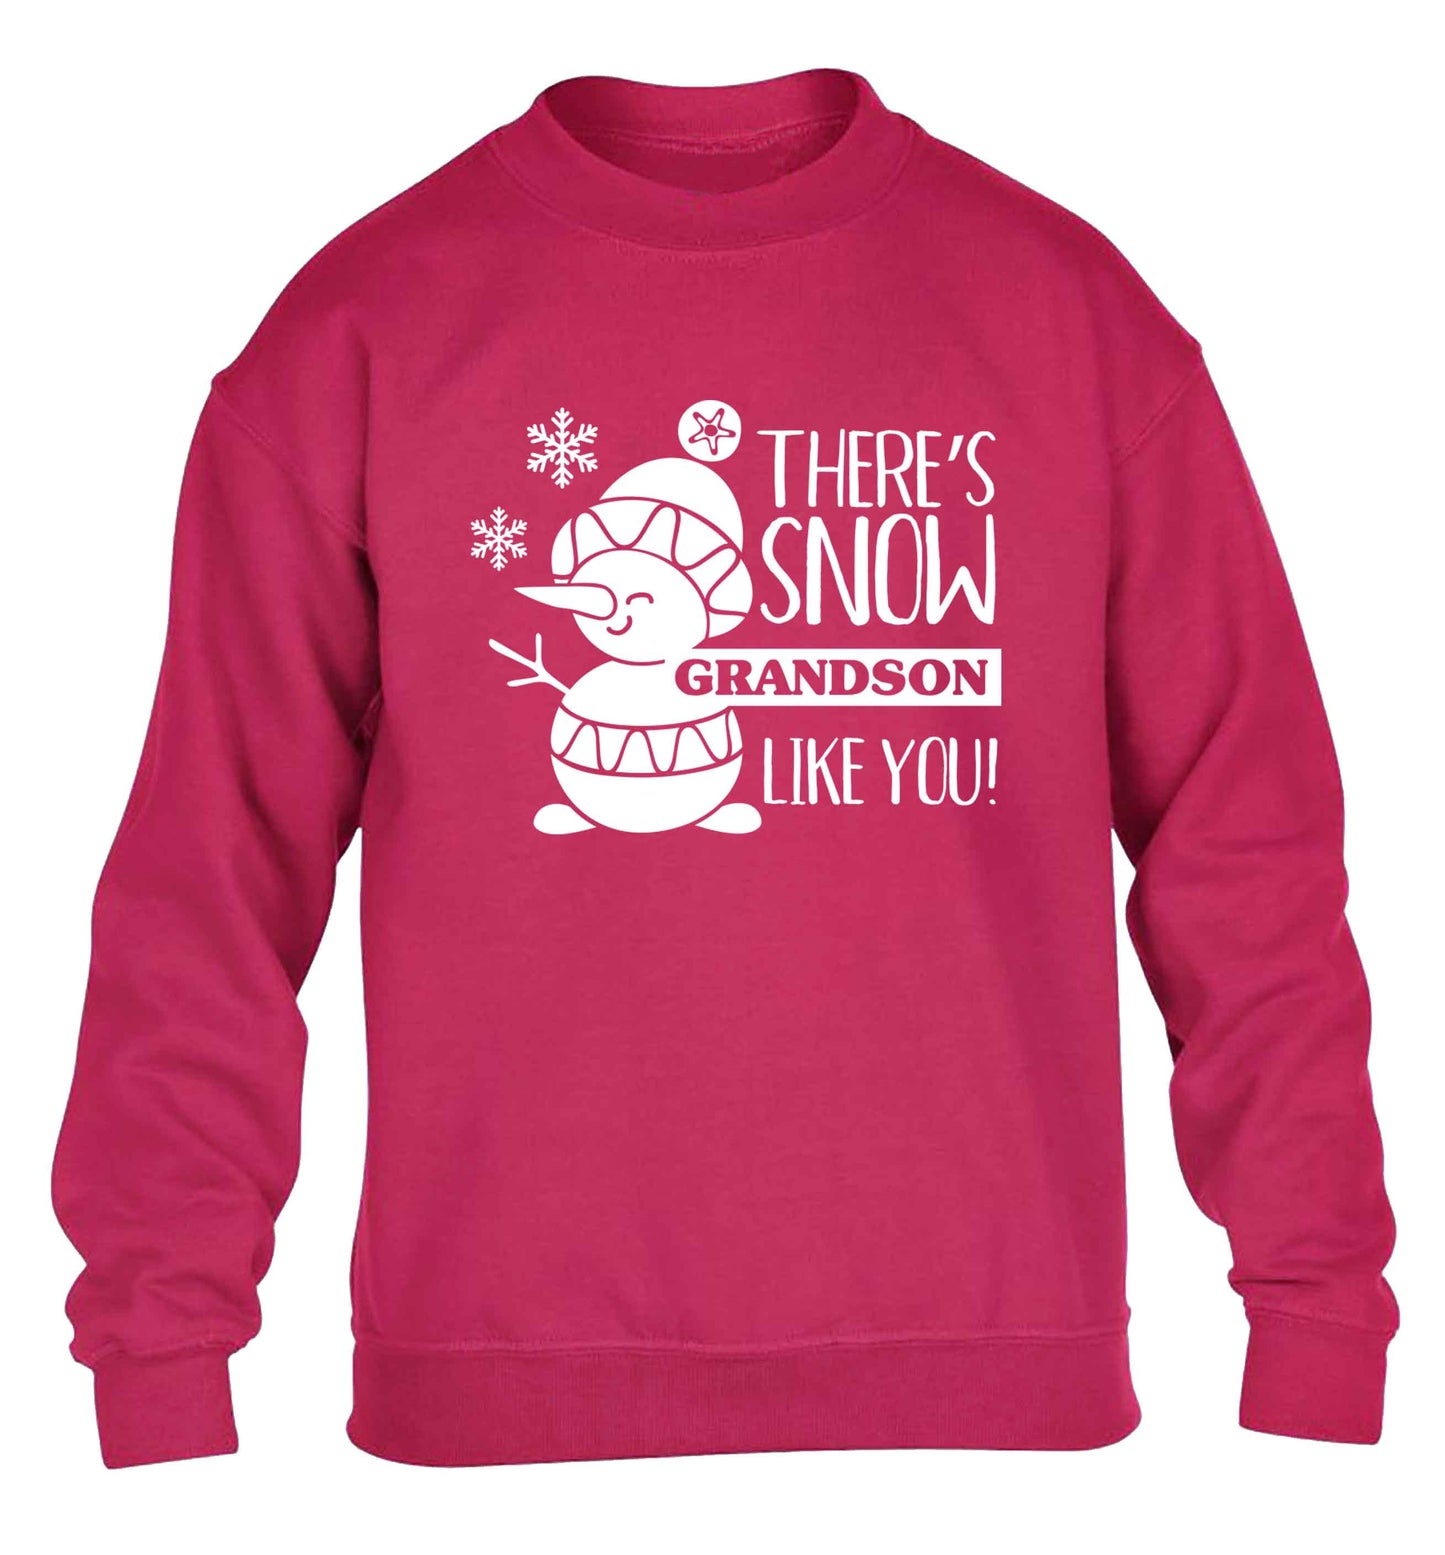 There's snow grandson like you children's pink sweater 12-13 Years